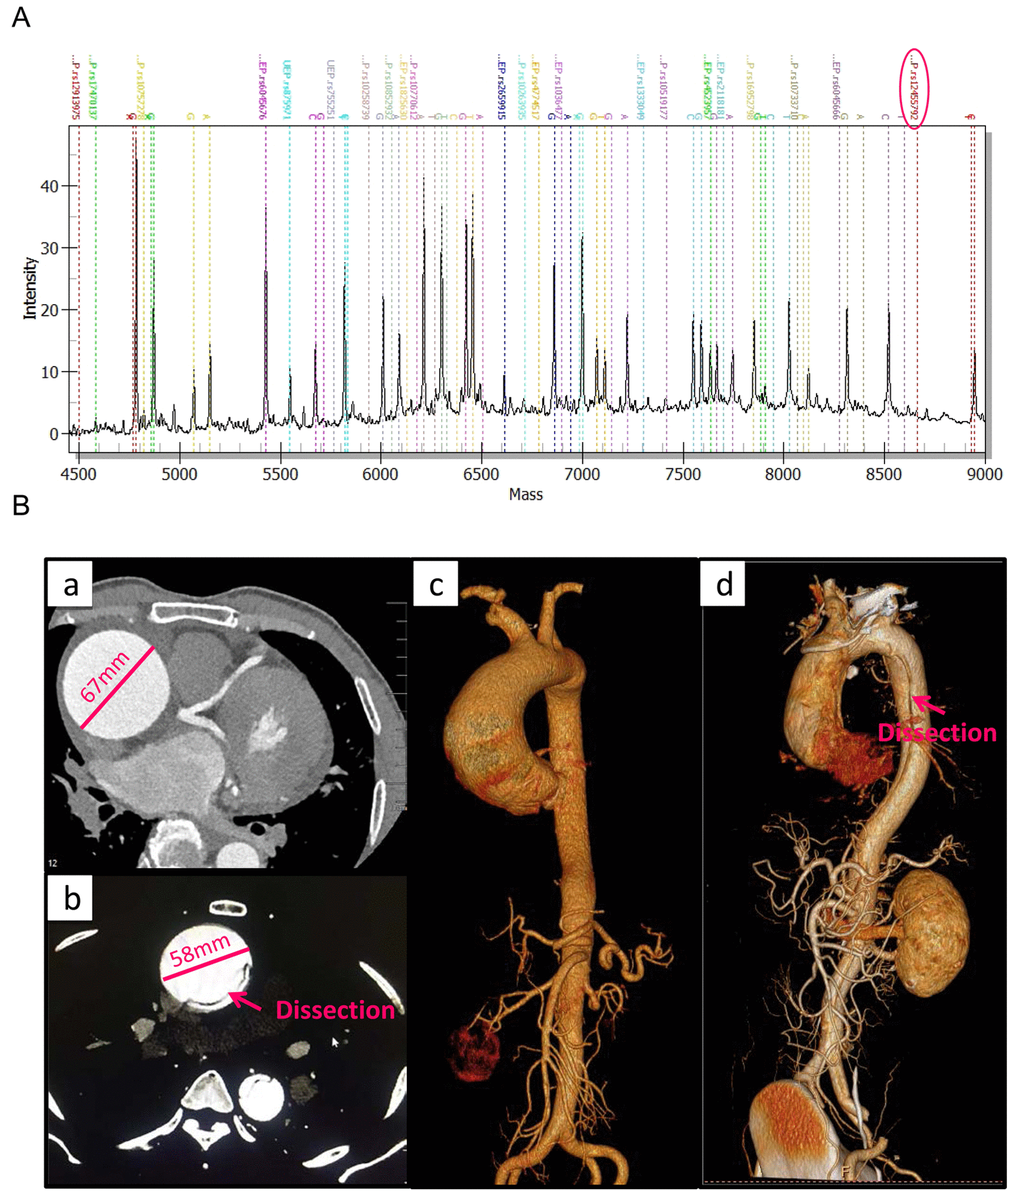 The MALDI-TOF MS spectrum of candidate SNPs and large vessels CT angiography for clinical features of TAAD patients. (A) The MALDI-TOF MS spectrum of candidate SNPs. Genotypes of SNPs are determined by plotting peak intensity (y-axis) against mass (Da) (x-axis). The spectrum of rs12455792 is indicated by a circle. (B) Large vessels CT angiography and 3D scanning images for clinical features of thoracic aortic aneurysm (a, c) and dissection (b, d) patients.